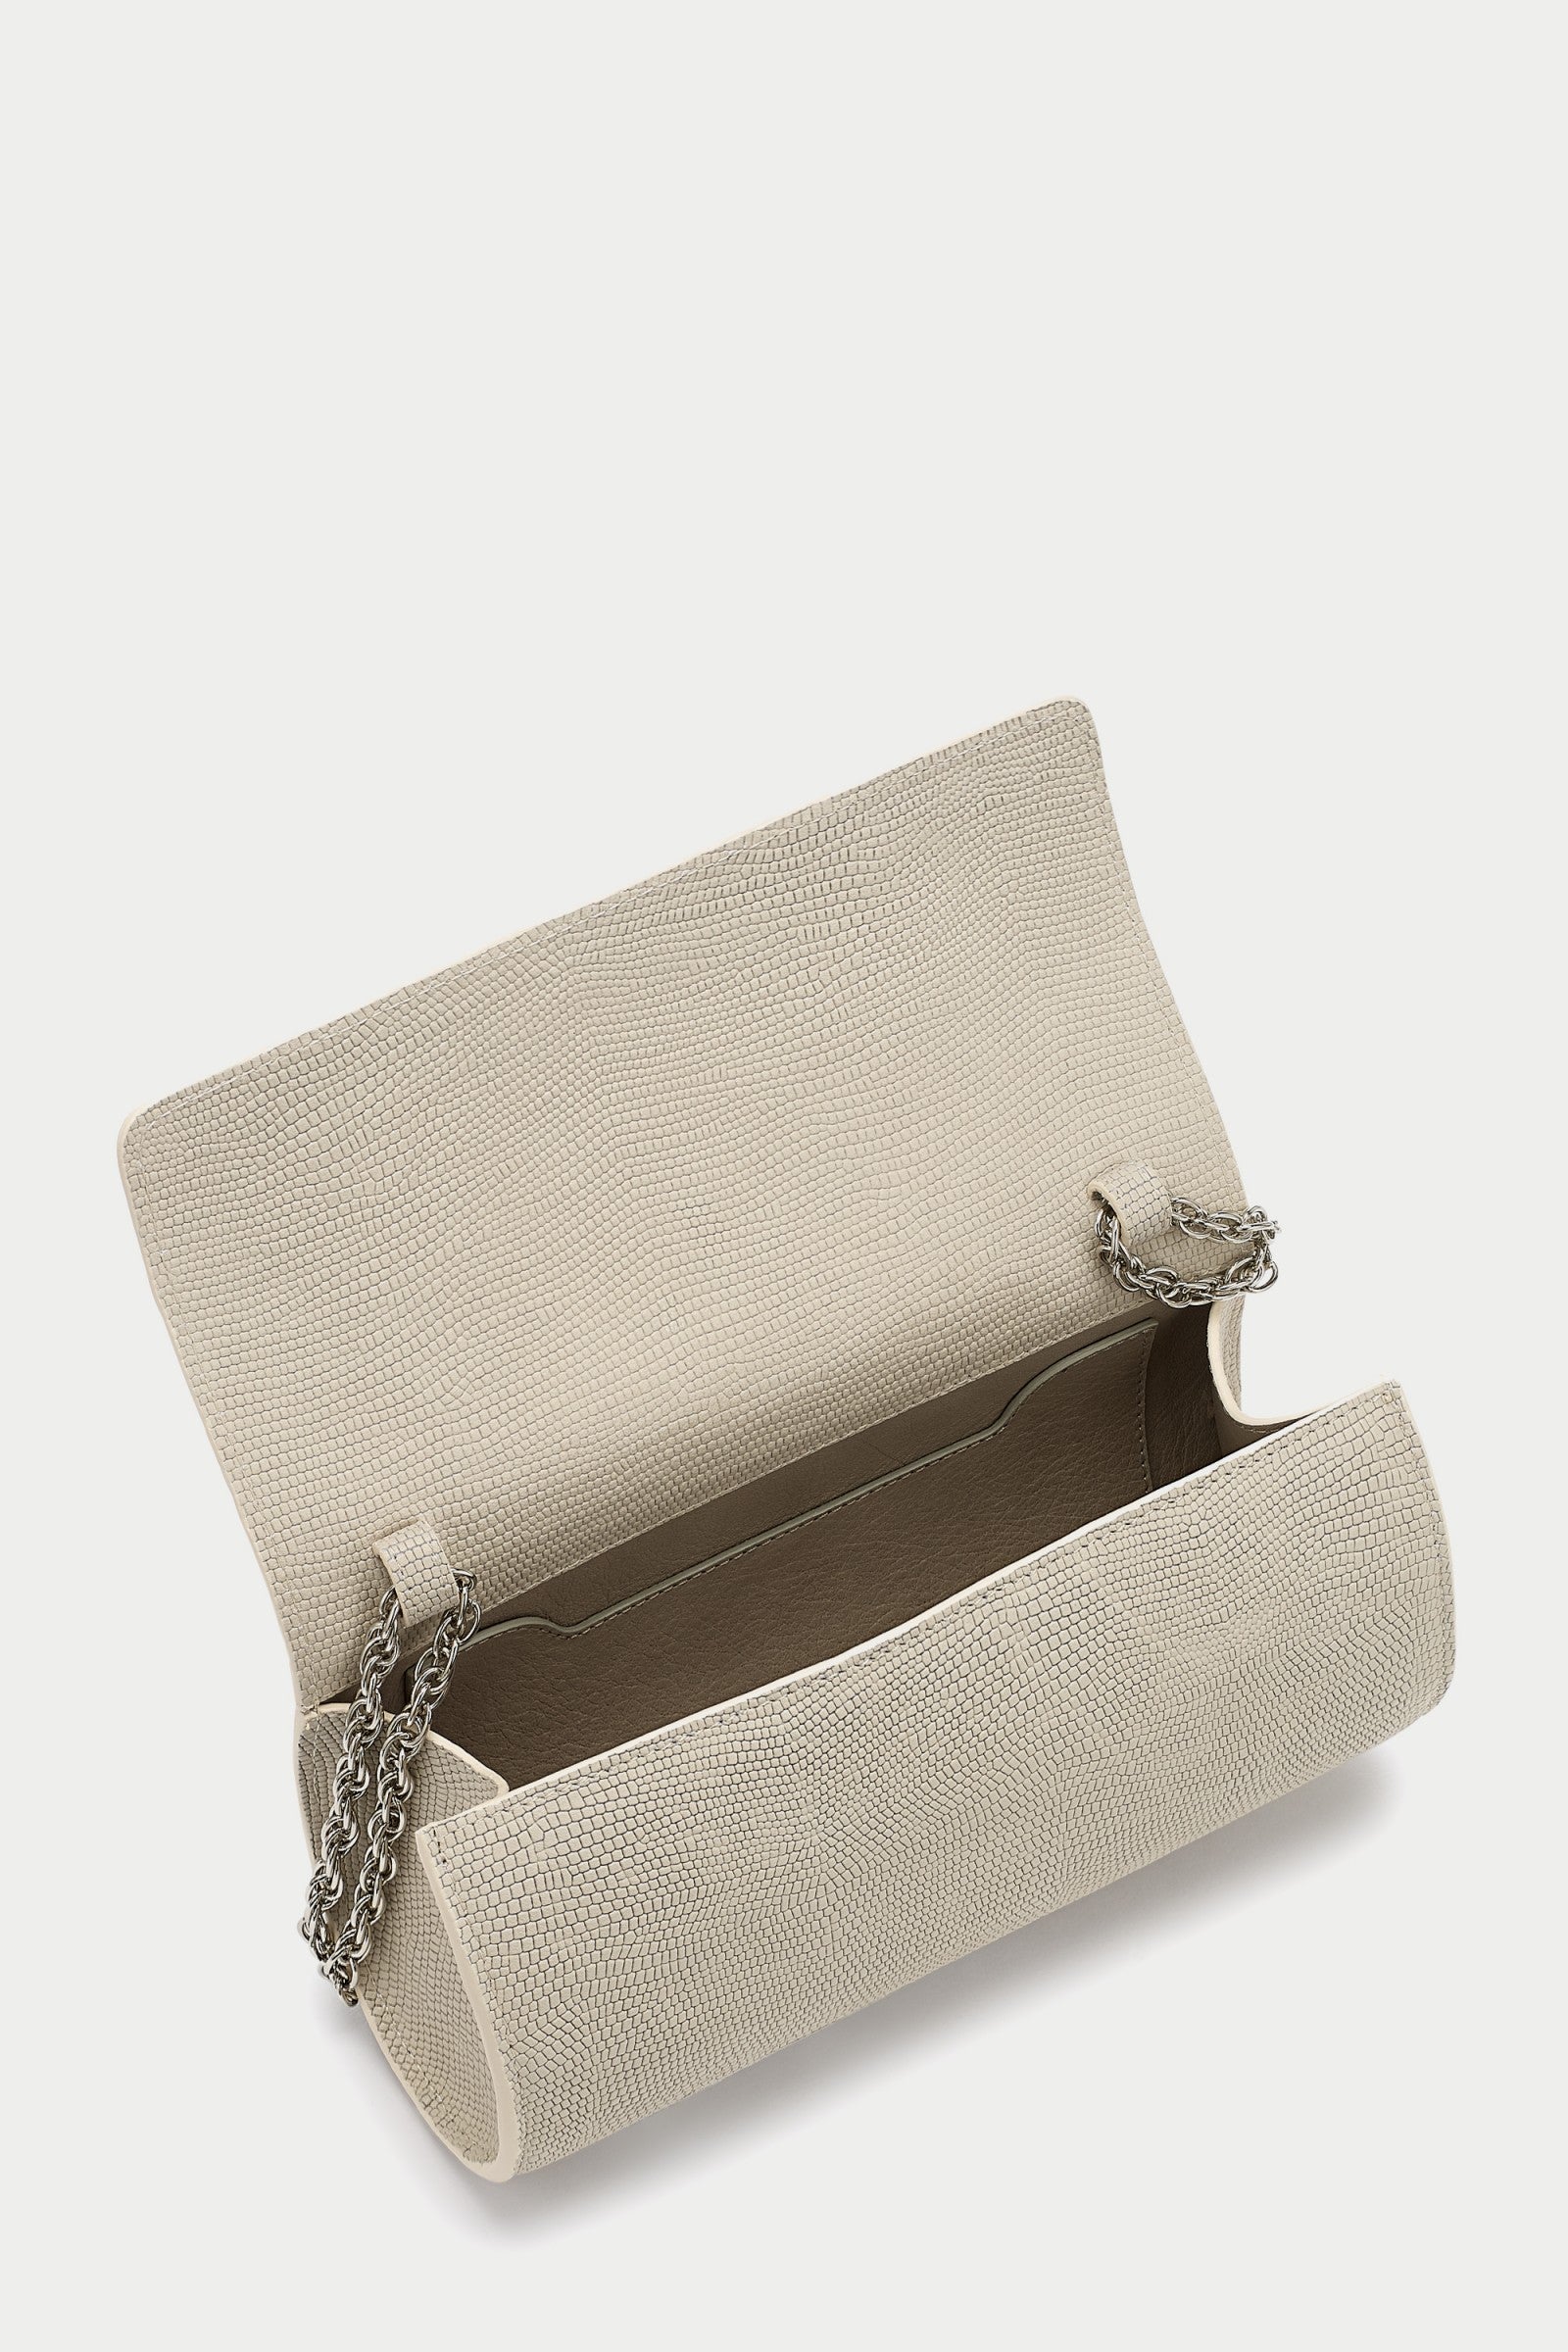 Kinsely CREMA Leather Roll Clutch